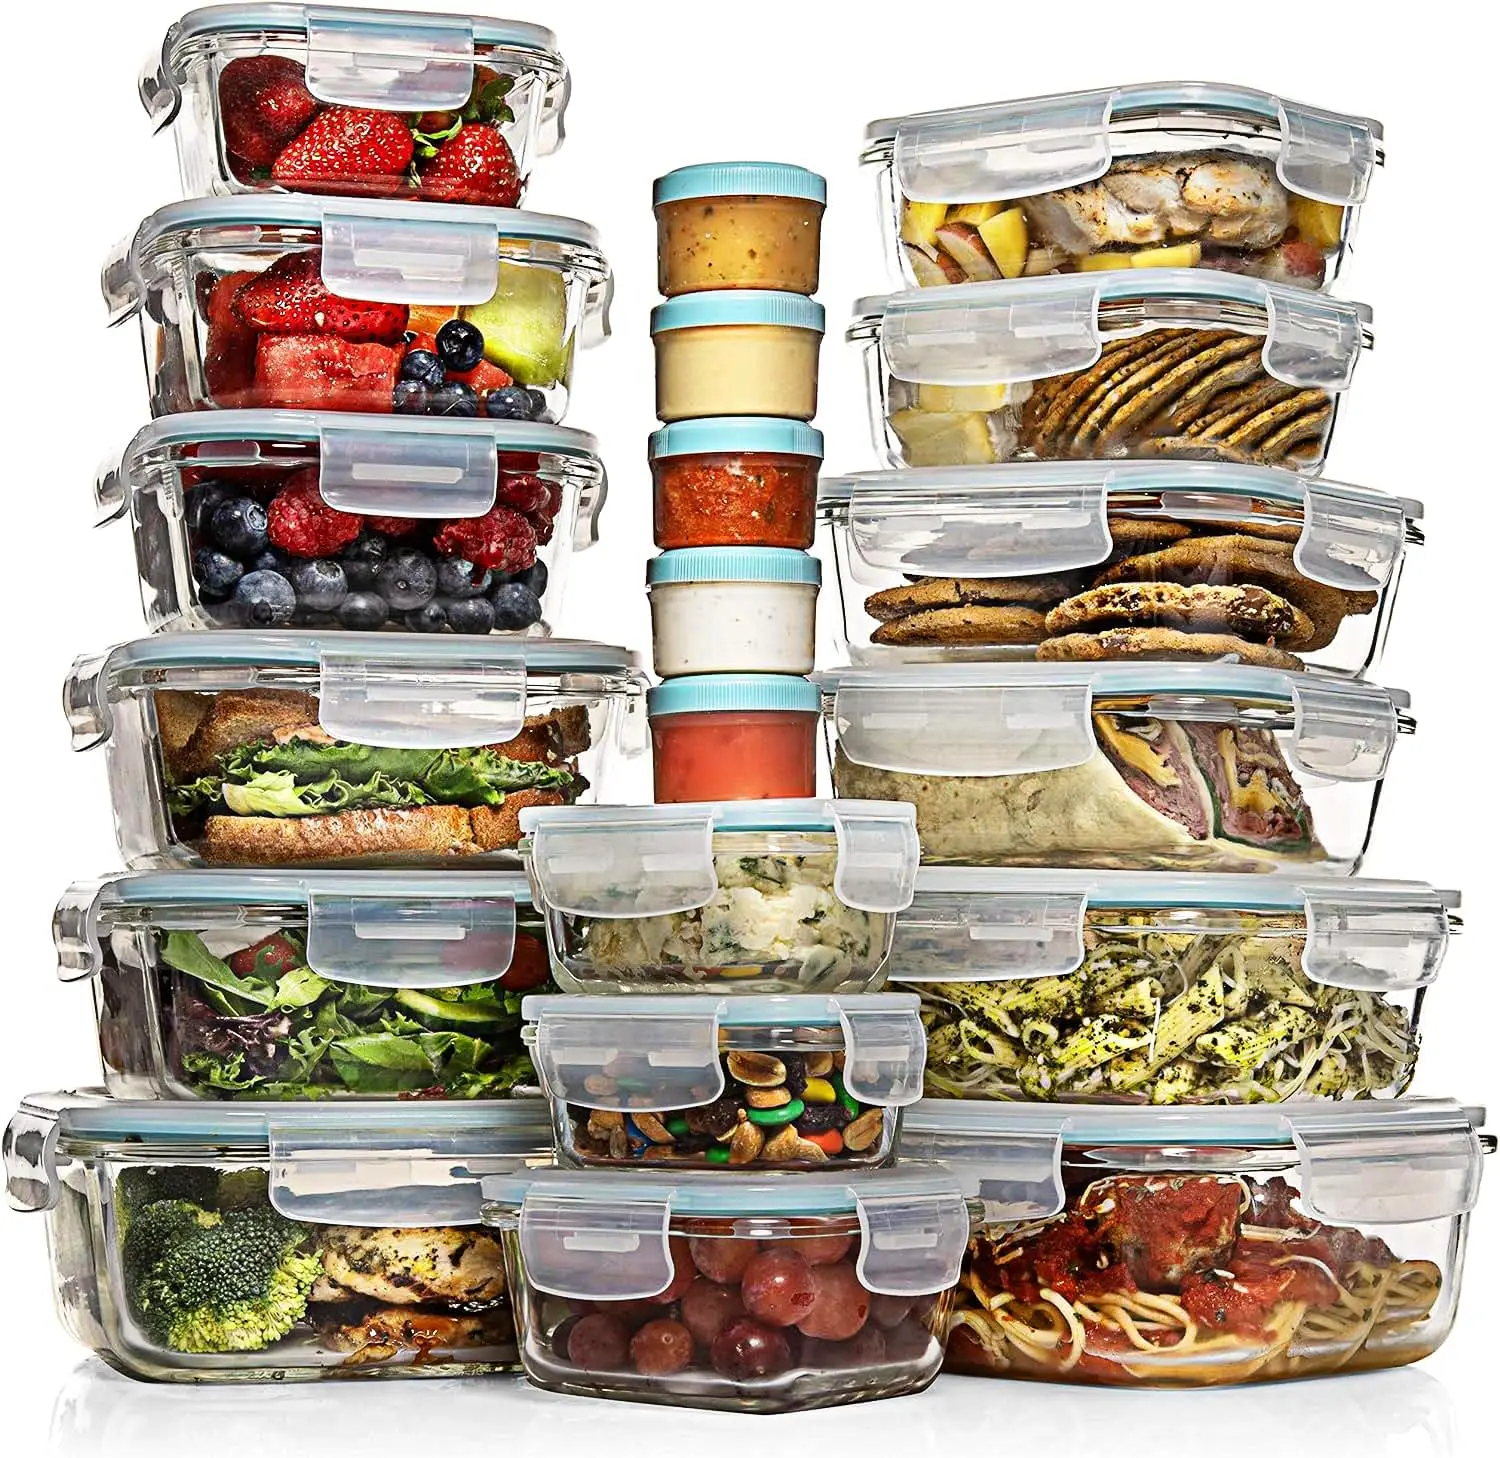 

35 Pc Set Glass Food Storage Containers with Lids - Meal Prep Airtight Bento Boxes BPA-Free 100% Leak Proof